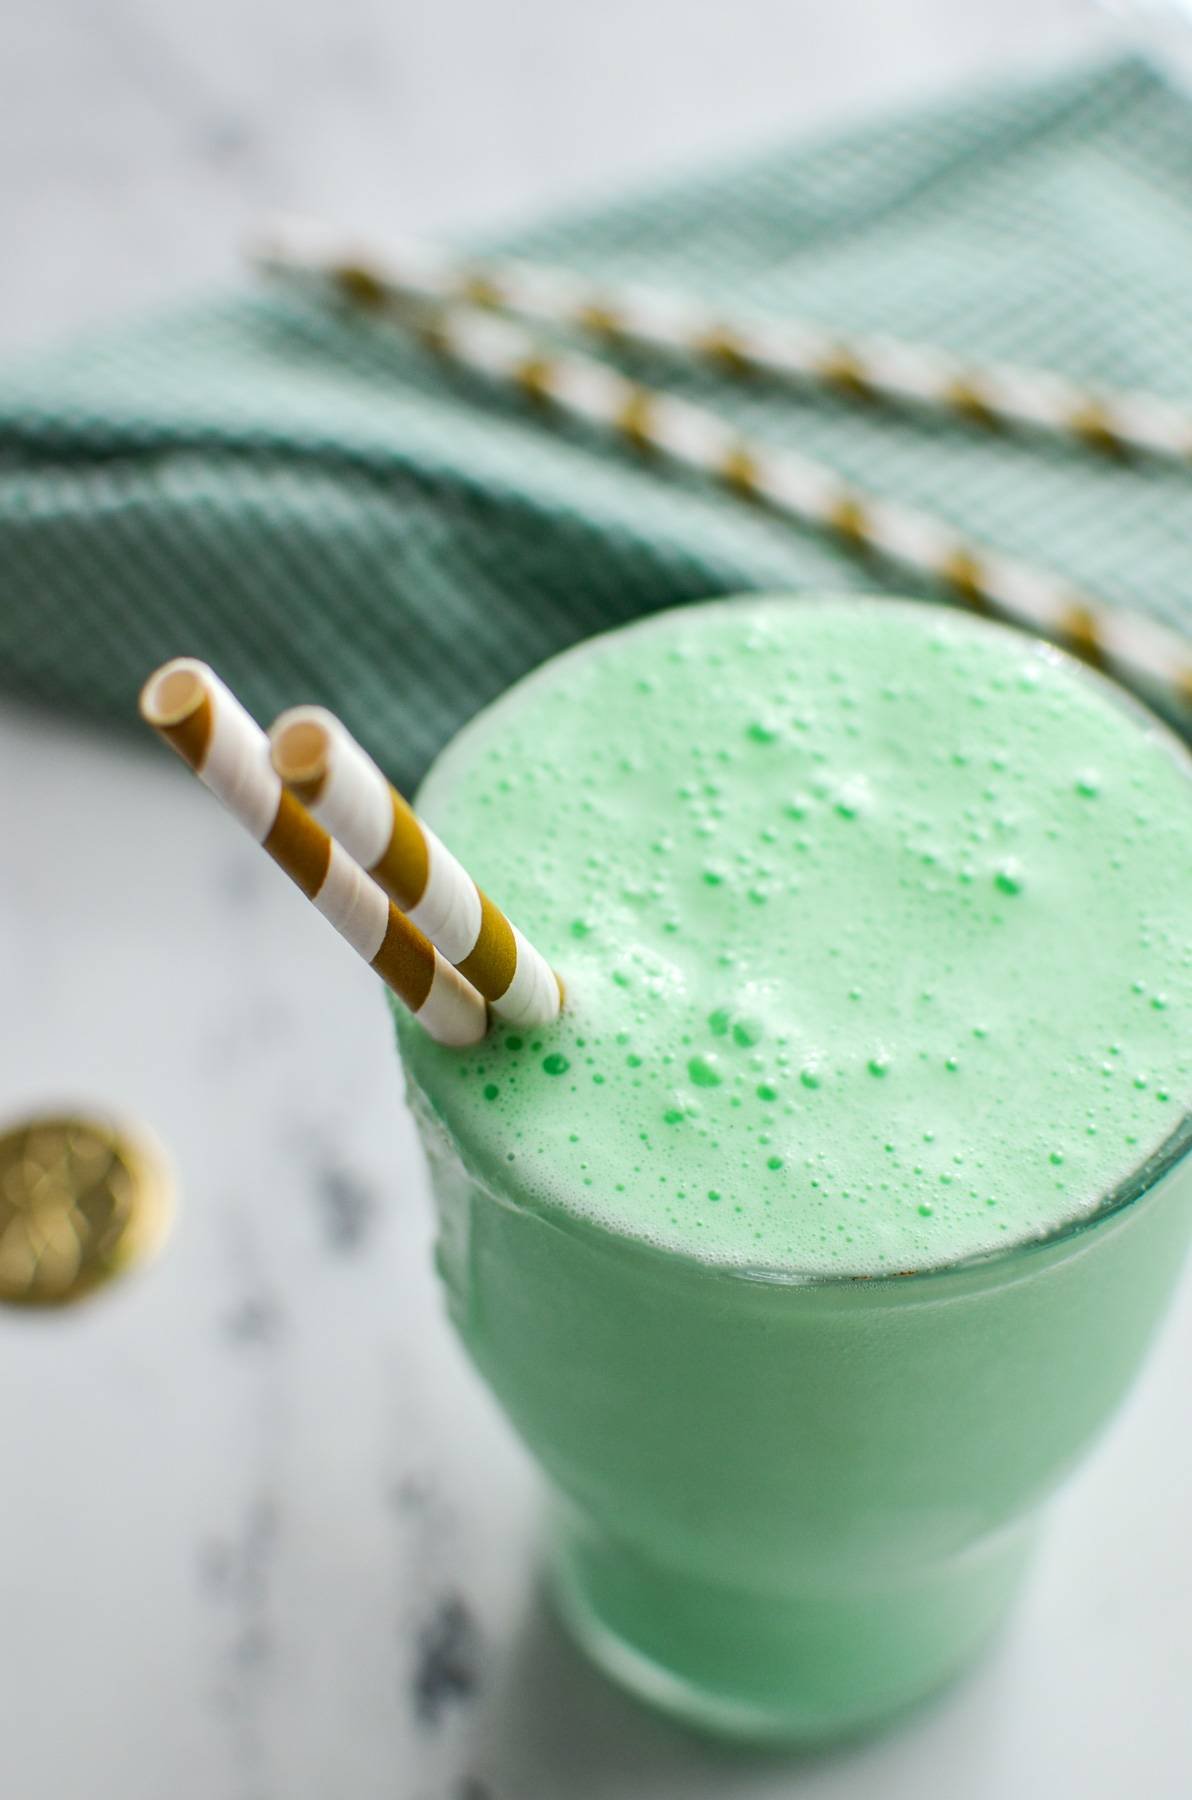 A large glass holding a green milkshake, with two straws sticking out of the side.